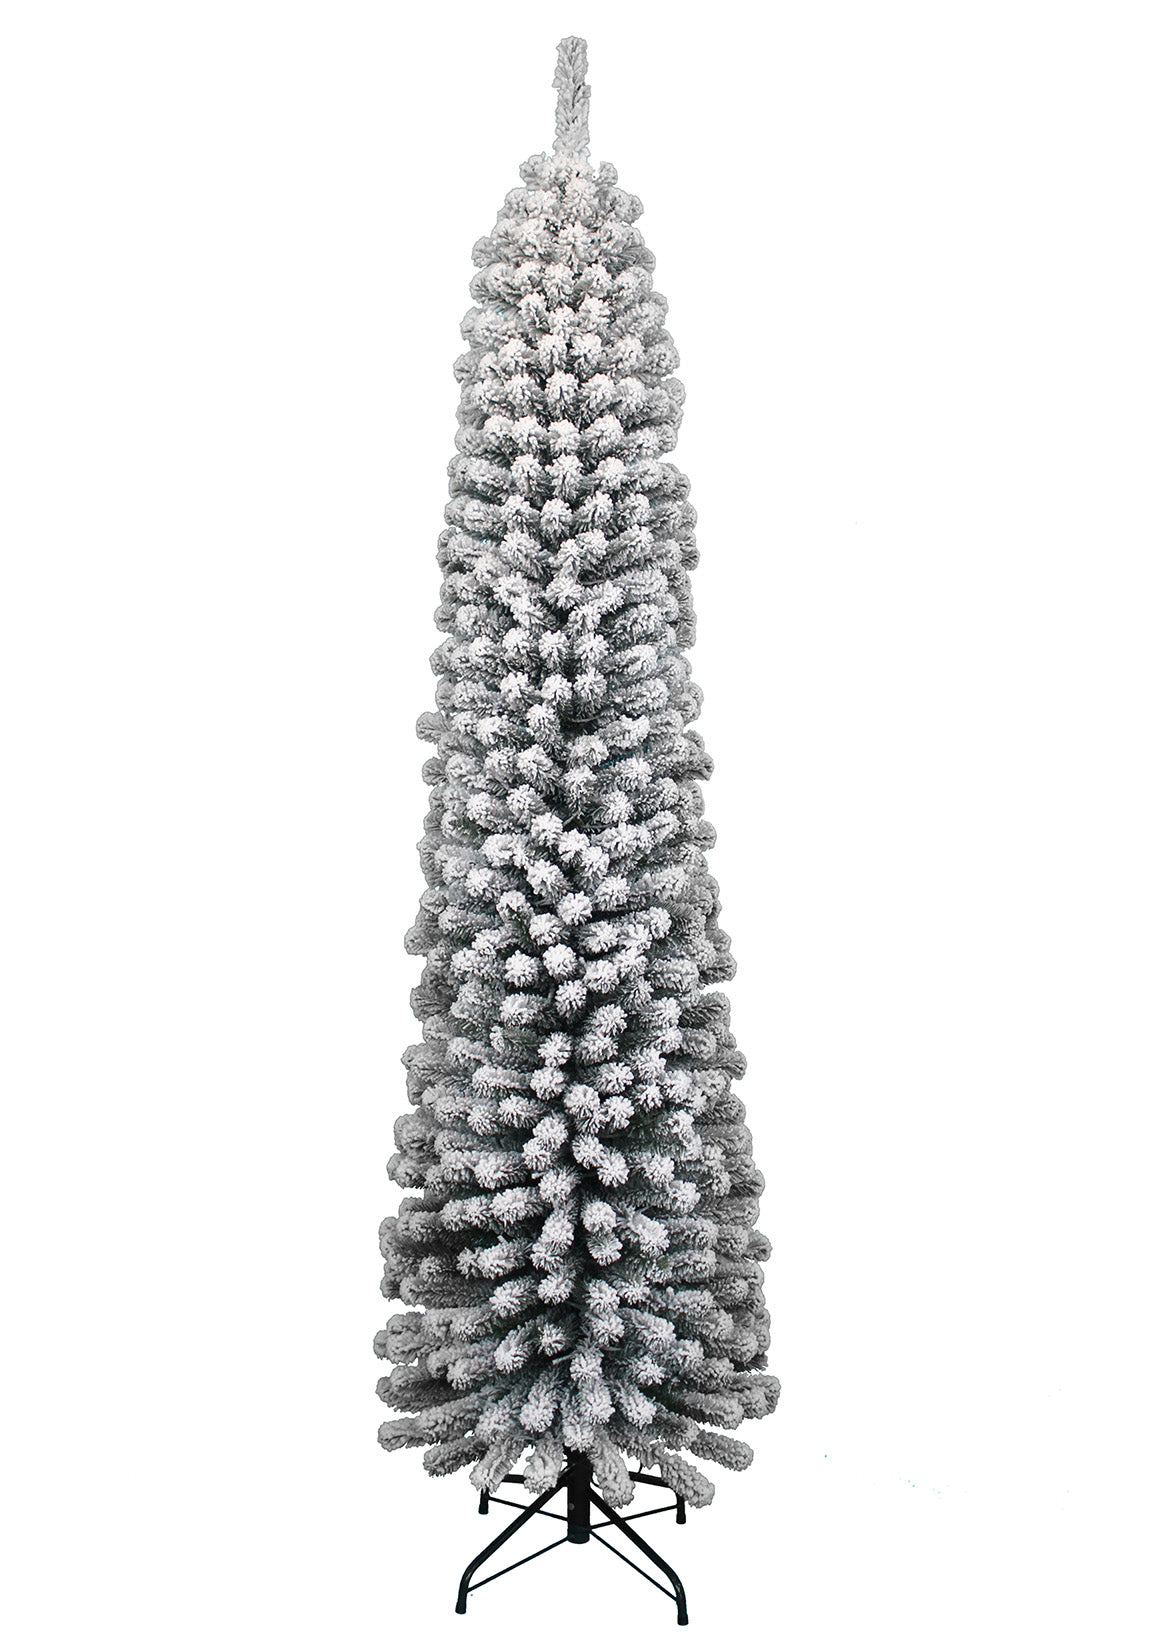 King of Christmas 9' Prince Flock Pencil Artificial Christmas Tree with 400 Warm White LED Lights